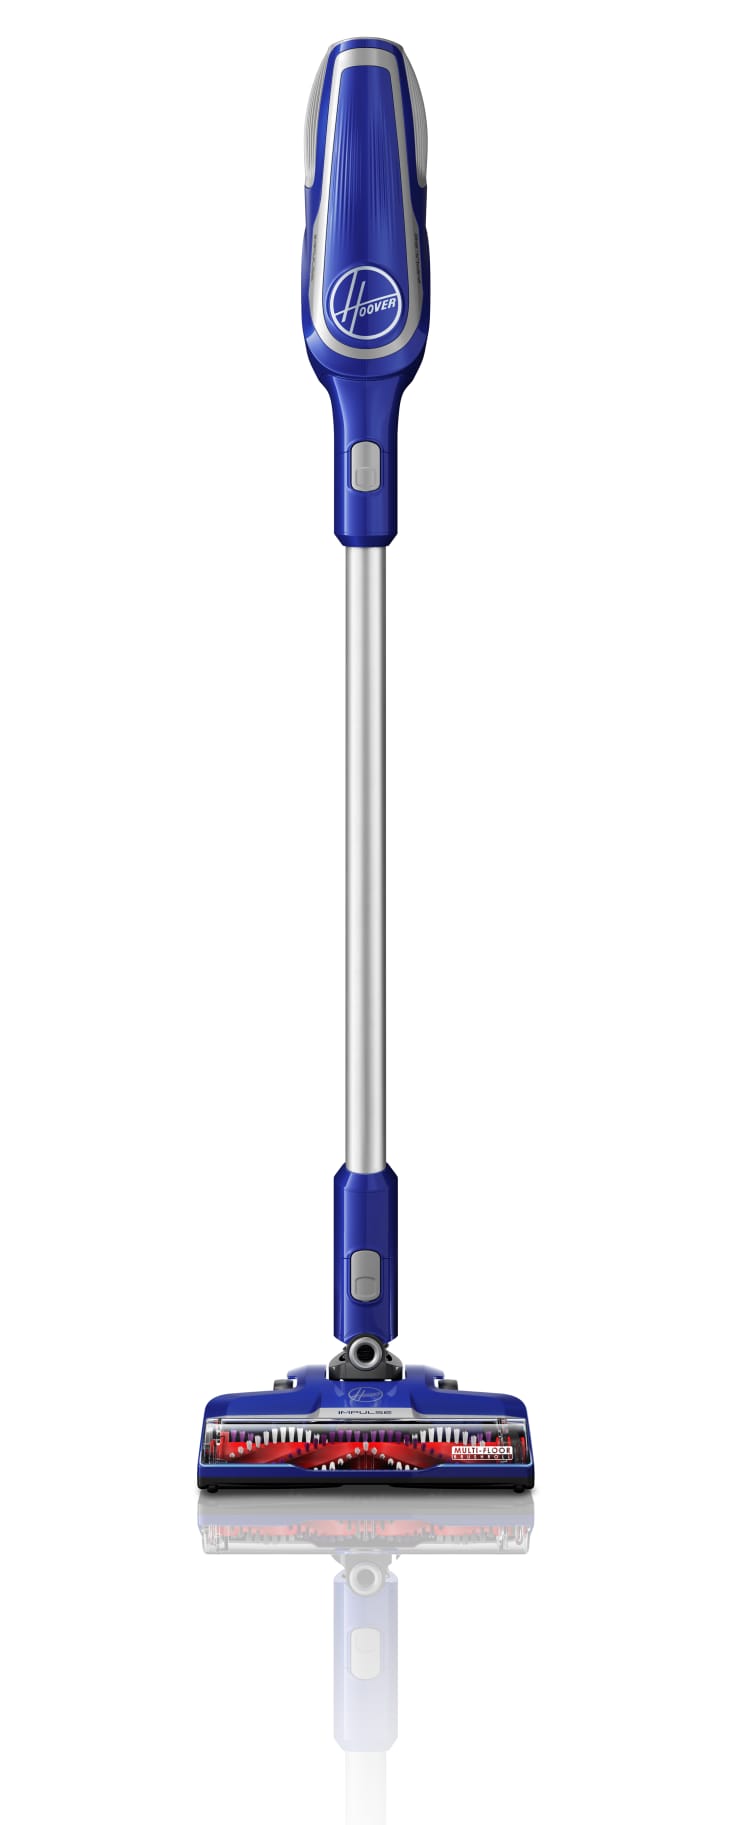 Product Image: Hoover Cordless Stick Vacuum Cleaner